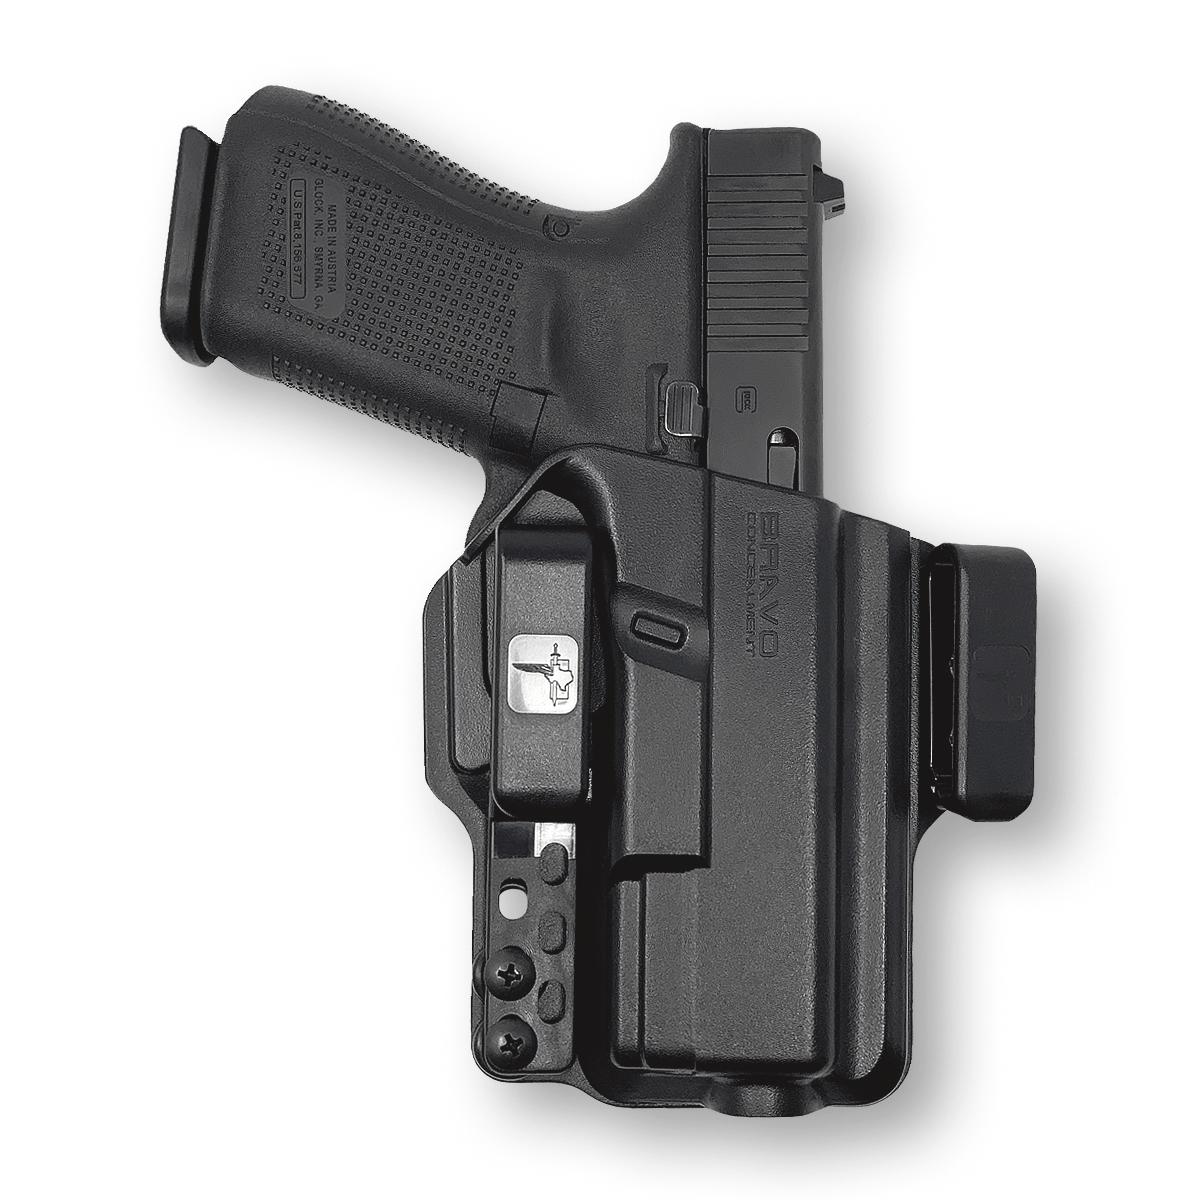 Best Deal for We The People Holsters - Carbon Fiber - Right Hand - IWB